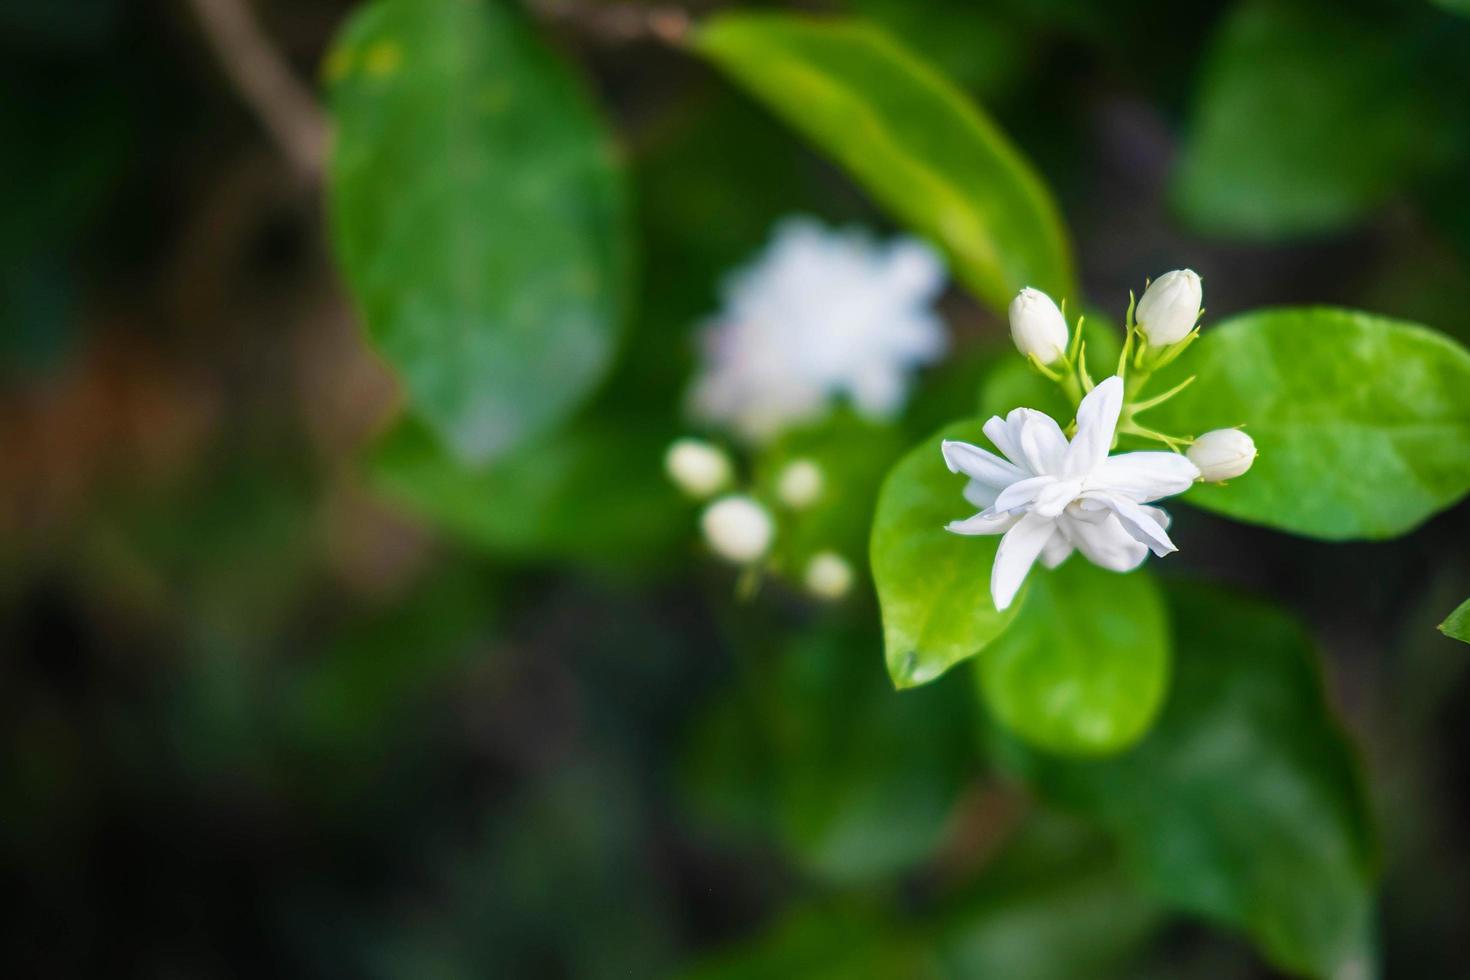 Close up of jasmine flowers in a garden photo